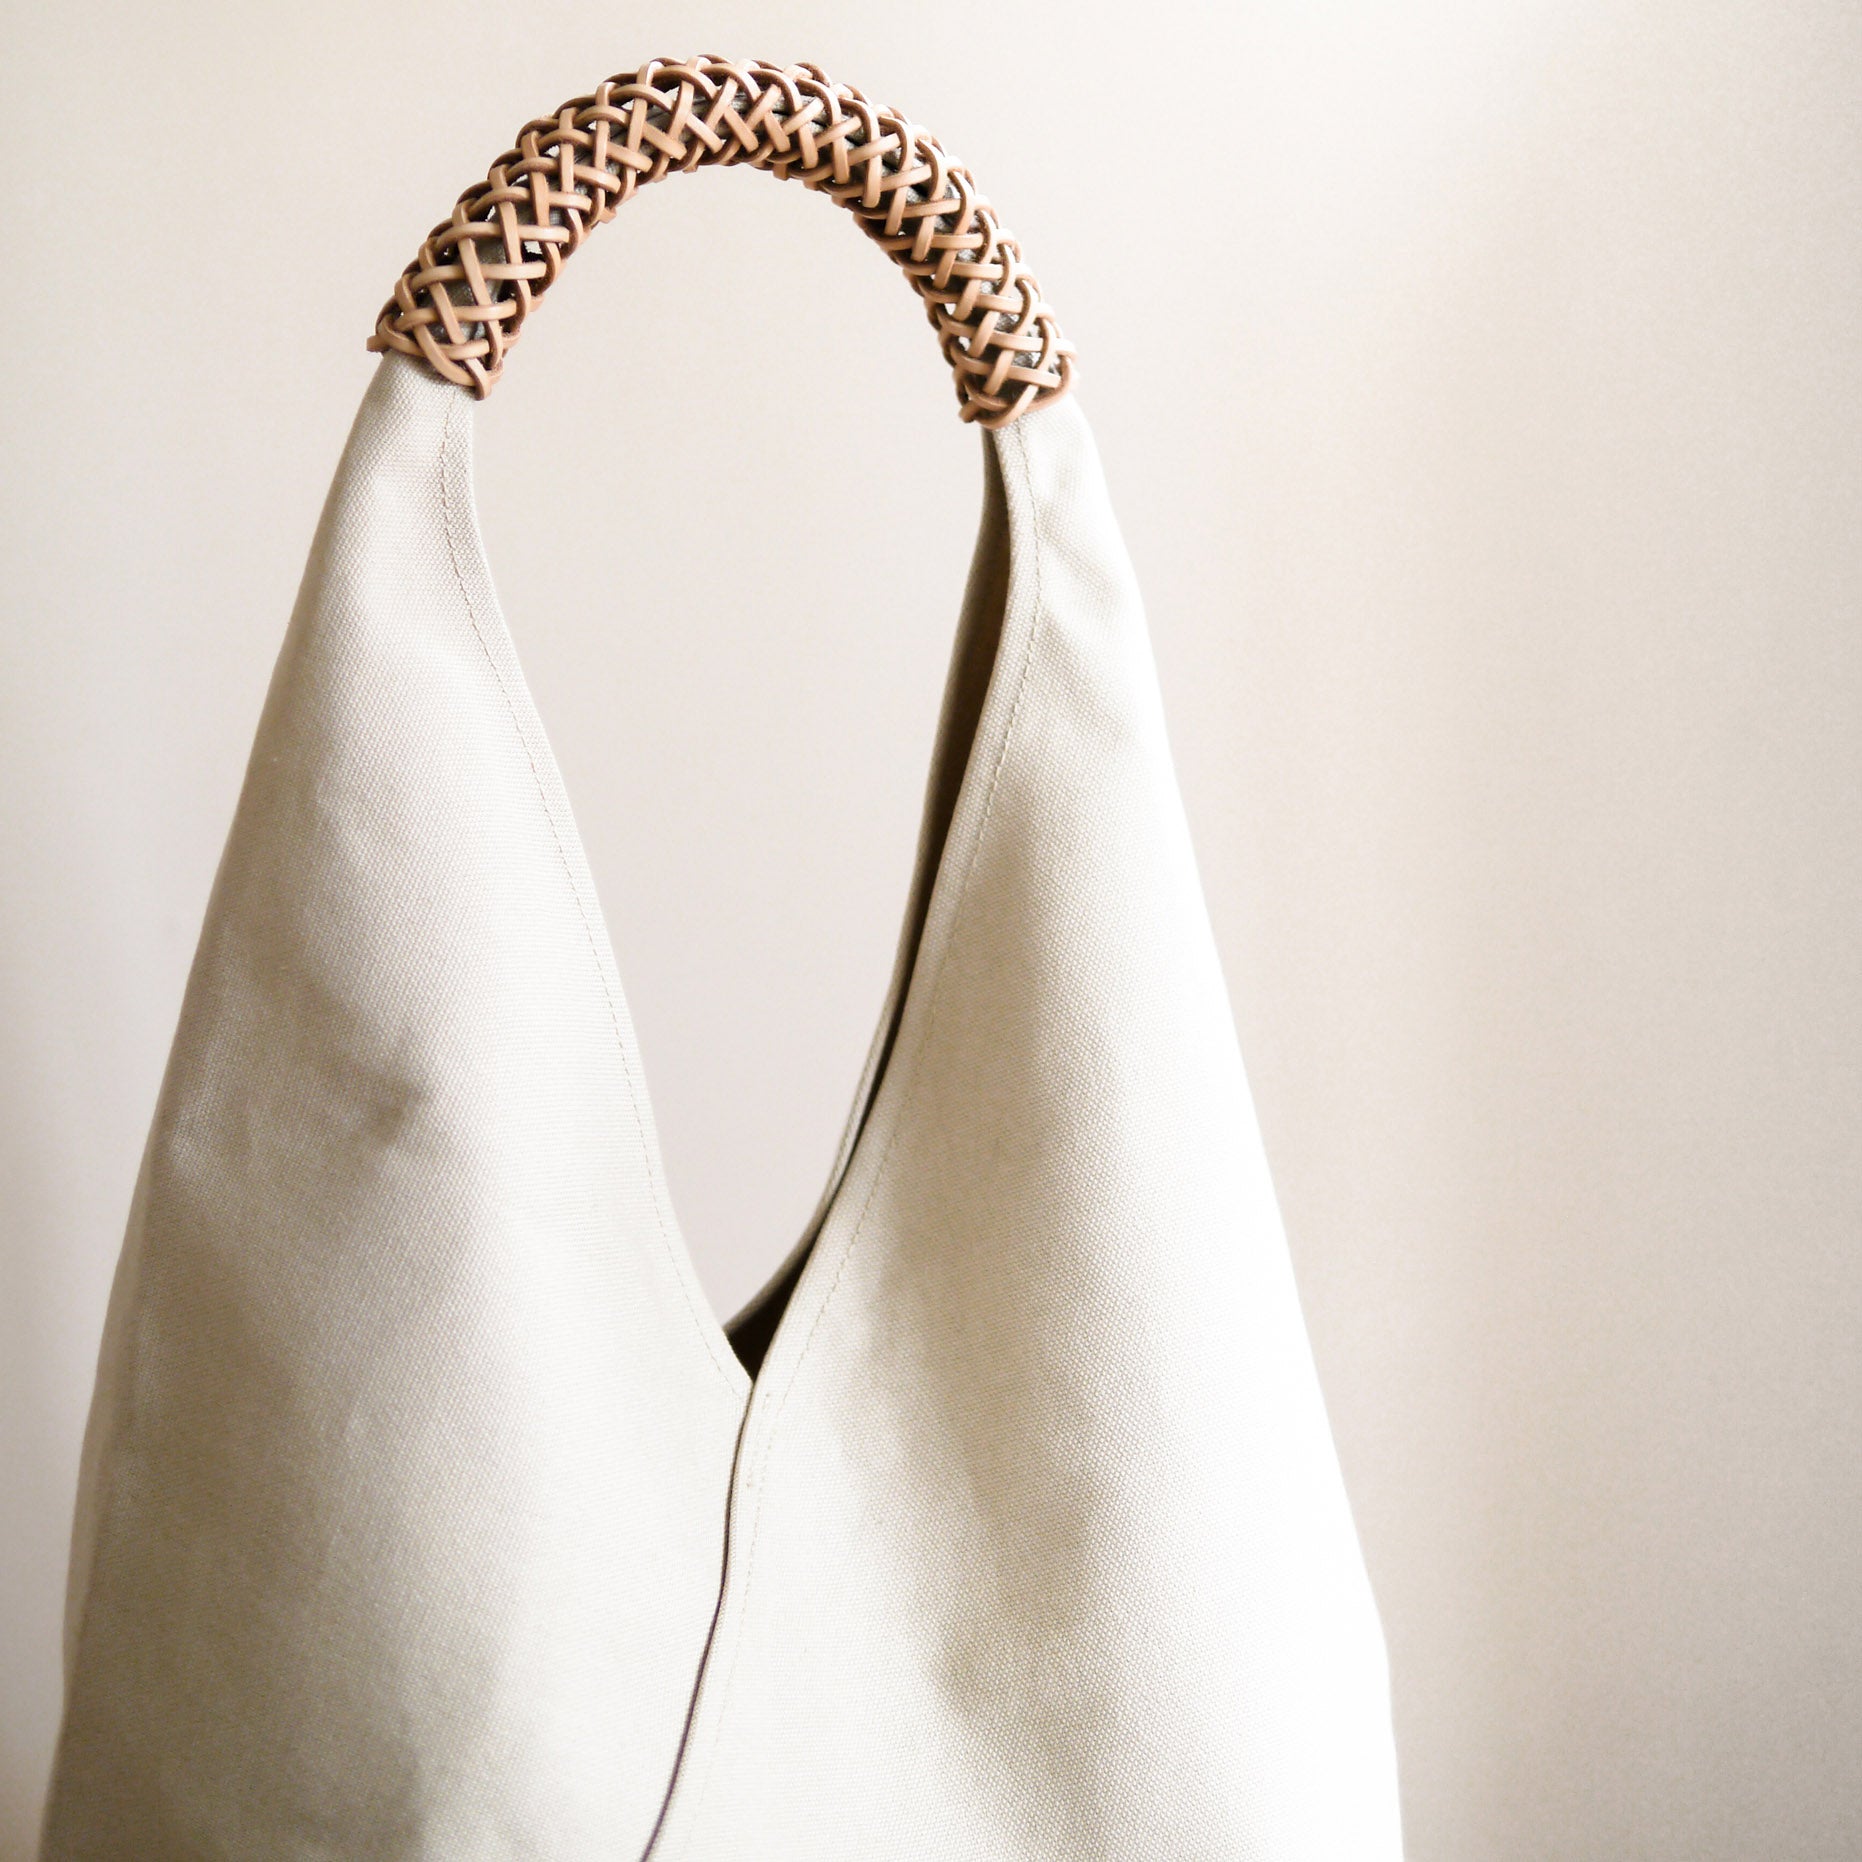 Woven Triangle Bag - Ink – MoMA Design Store